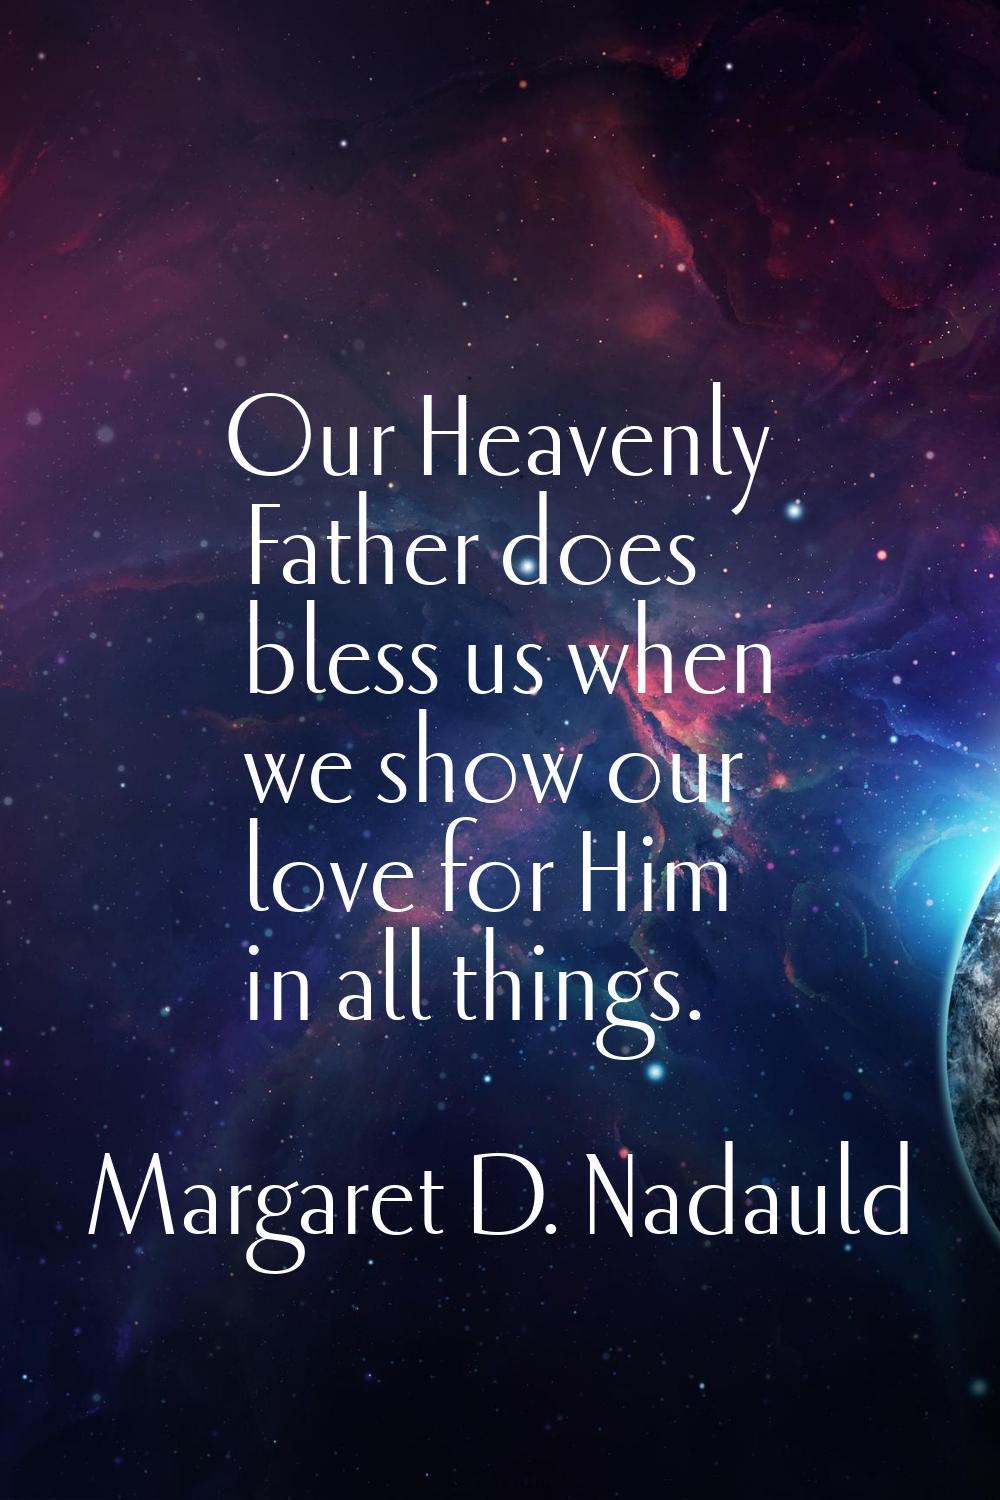 Our Heavenly Father does bless us when we show our love for Him in all things.